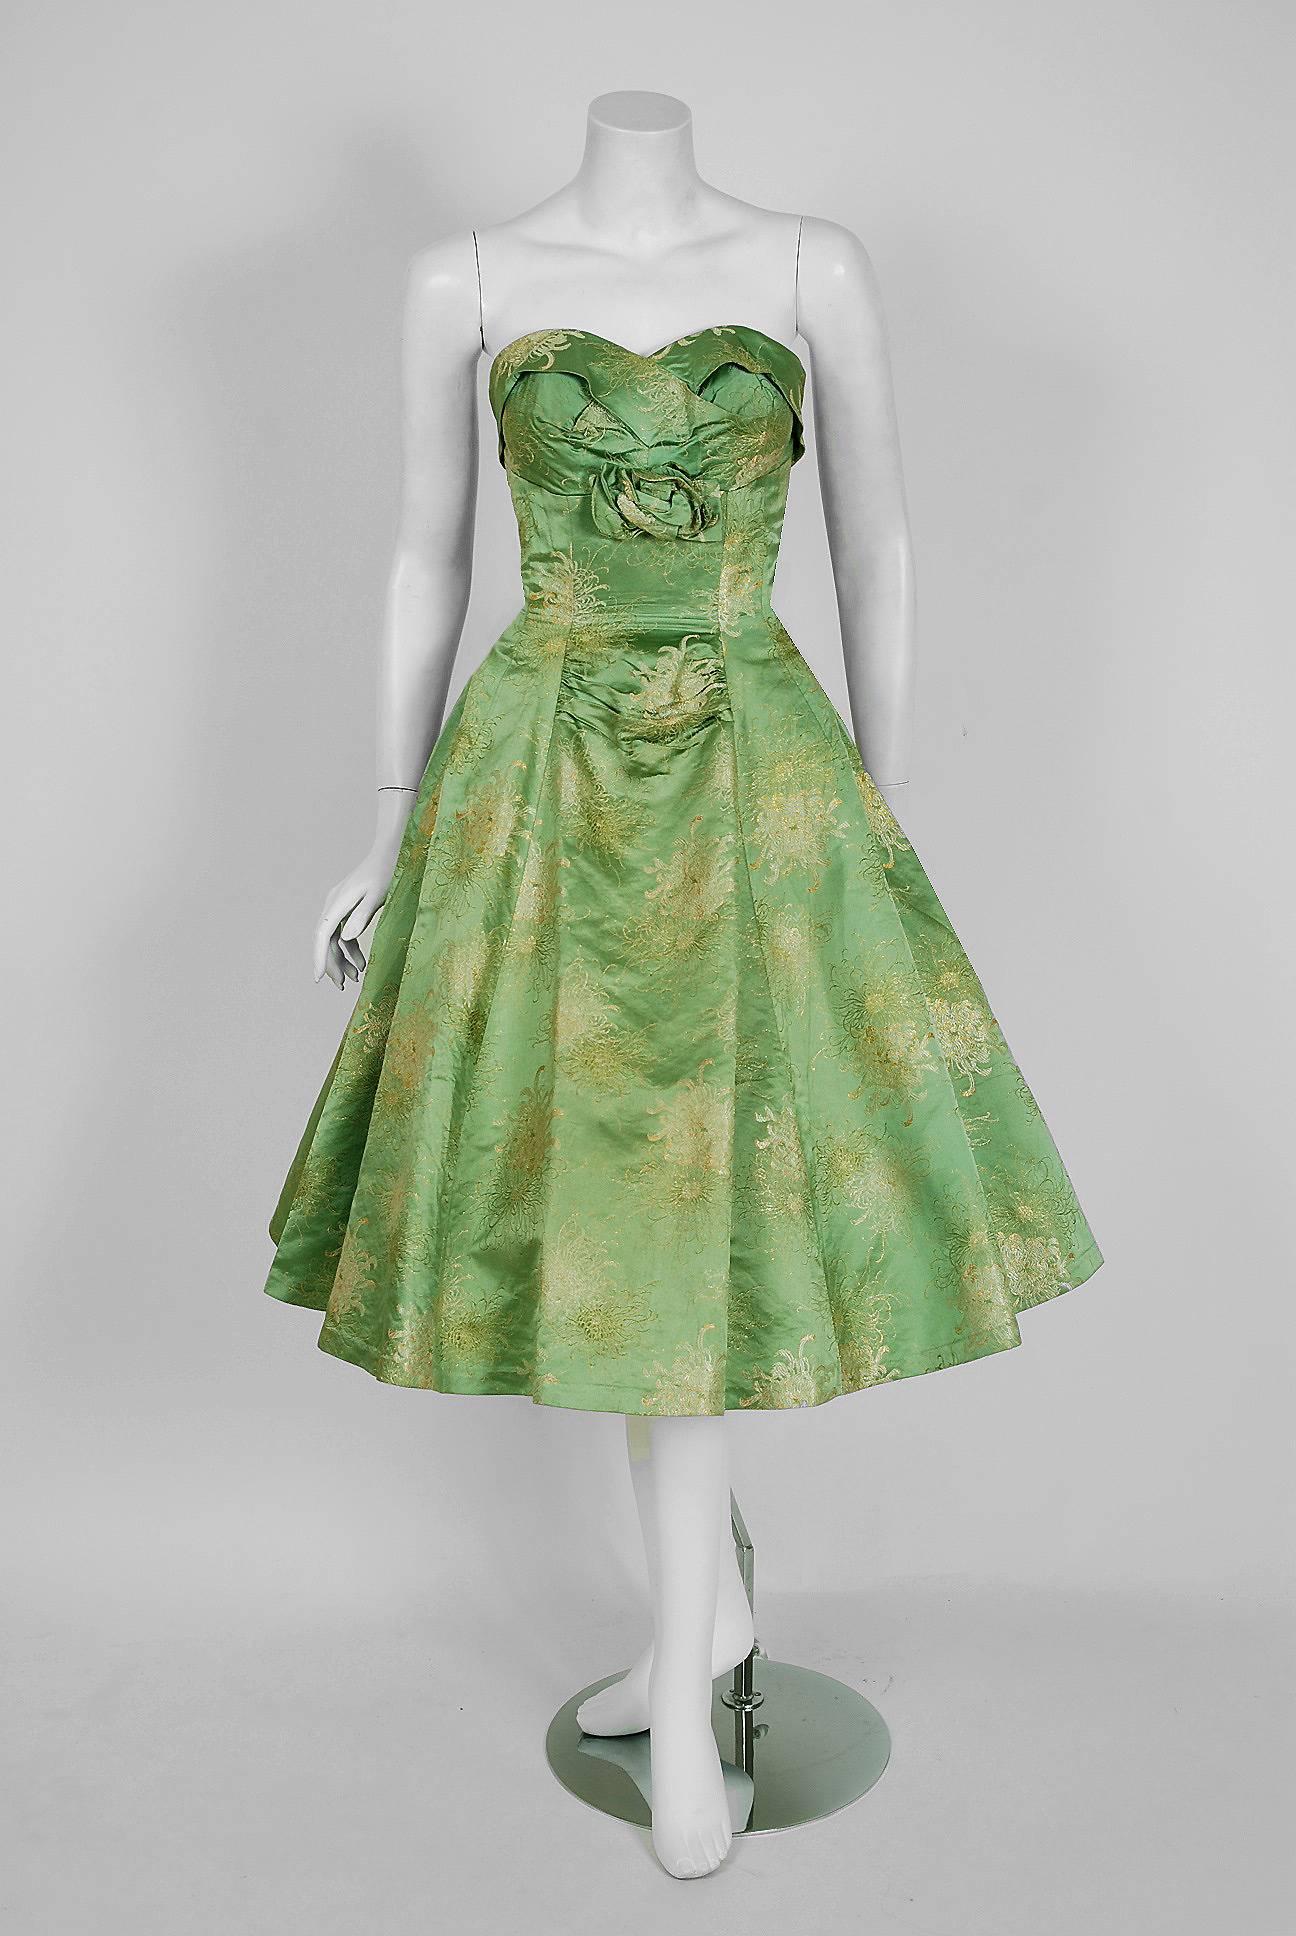 In this gorgeous 1950's sage-green metallic floral party dress, the detailed construction and meticulous attention to detail are comparable to what you will find in modern couture. This enchanting garment is fashioned from shimmering silk-brocade in